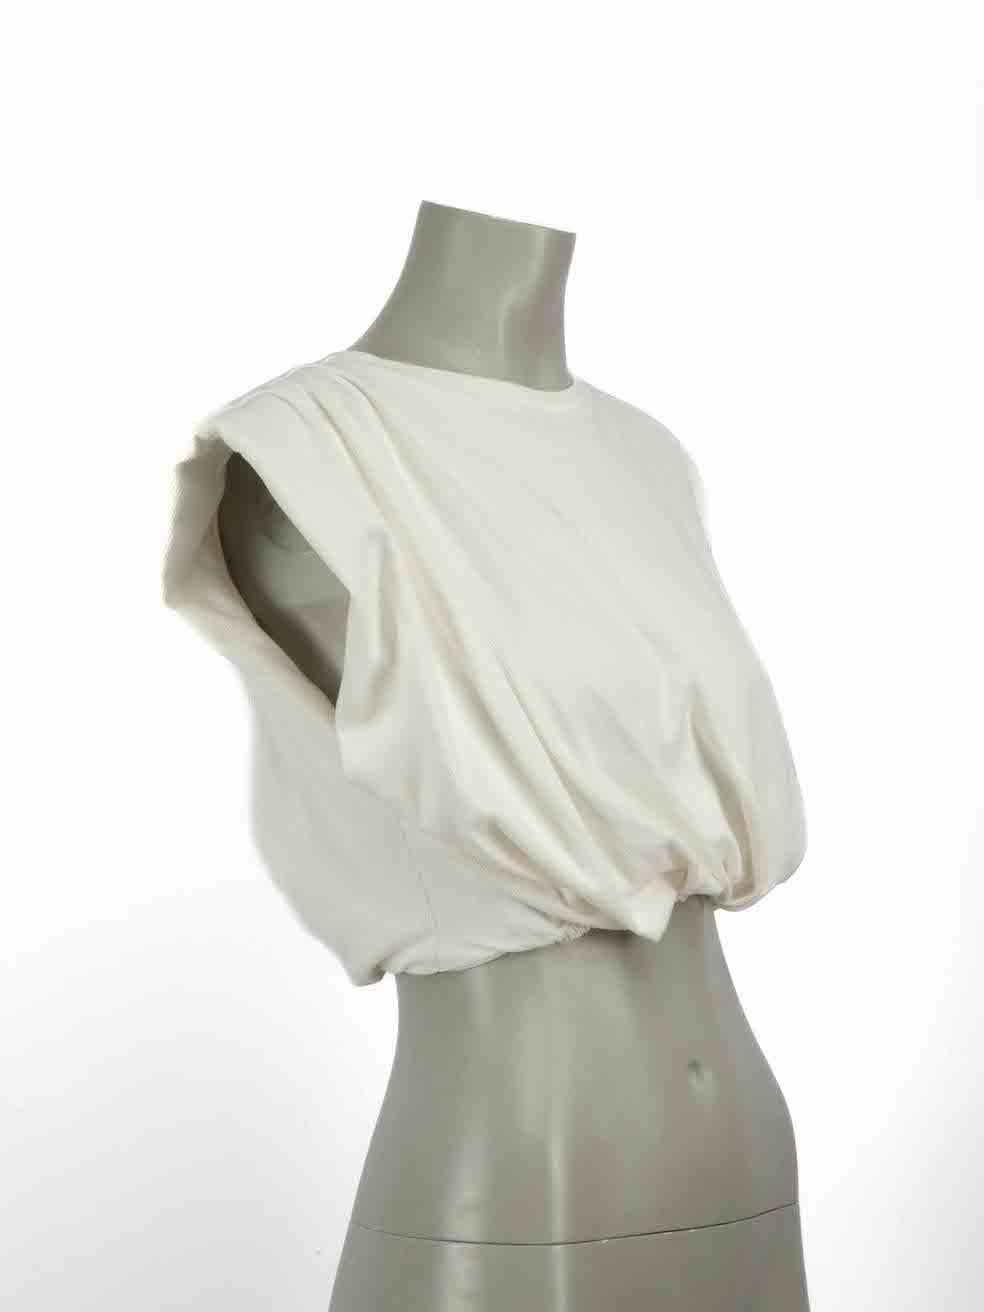 CONDITION is Very good. Minimal wear to top is evident. Minimal wear to fabric with tiny spot at front right near side seam on this used Johanna Ortiz designer resale item.

Details
White
Cotton
Sleeveless crop top
Ruched accent
Padded